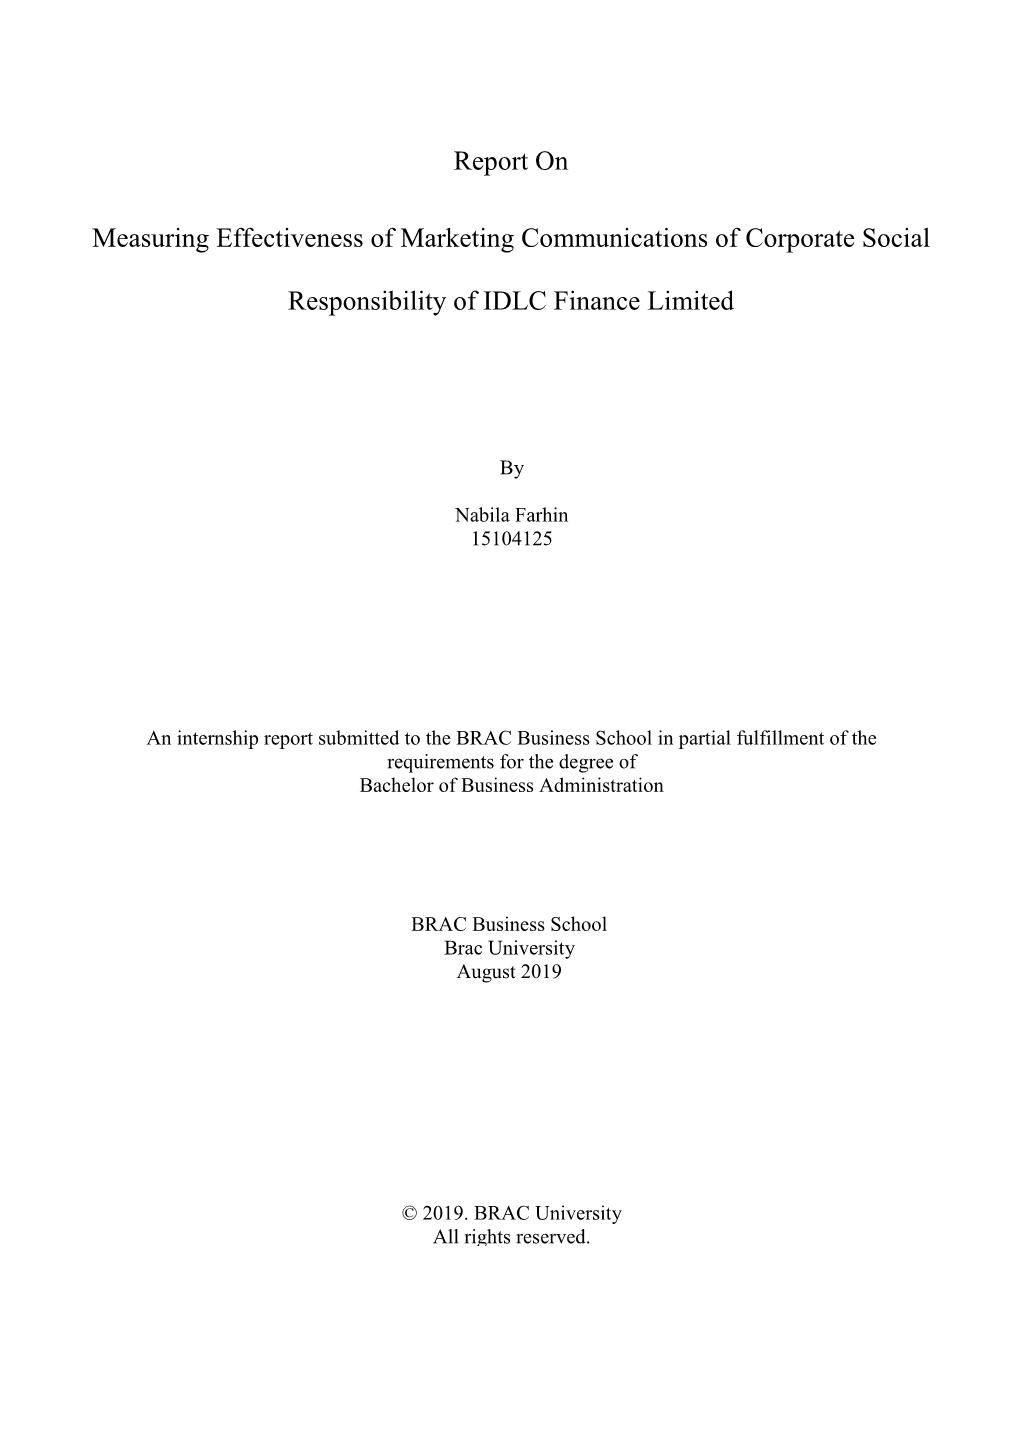 Report on Measuring Effectiveness of Marketing Communications Of